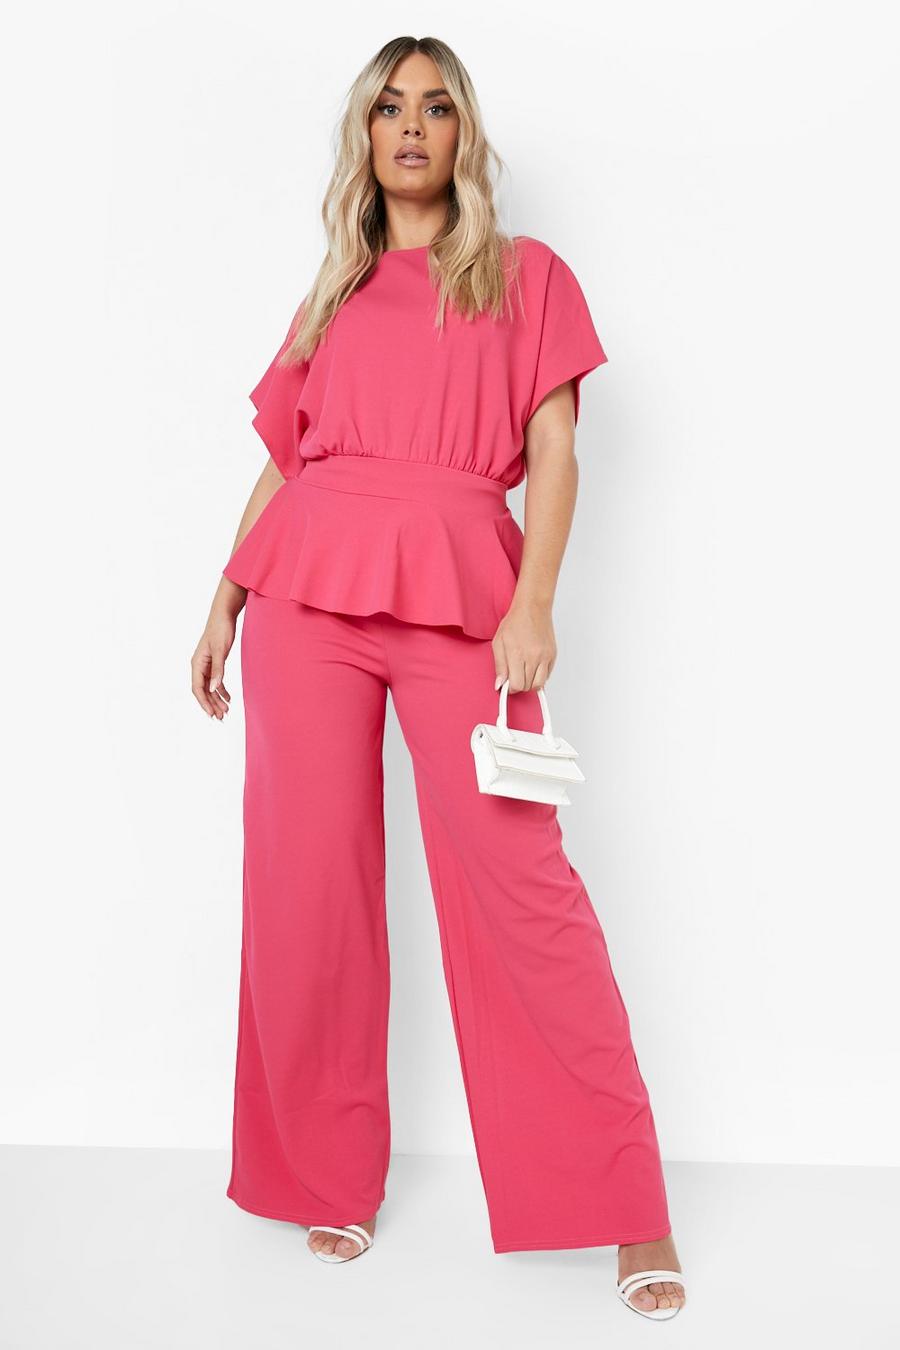 Hot pink Plus Peplum Tie And Wide Leg Pants Two-Piece